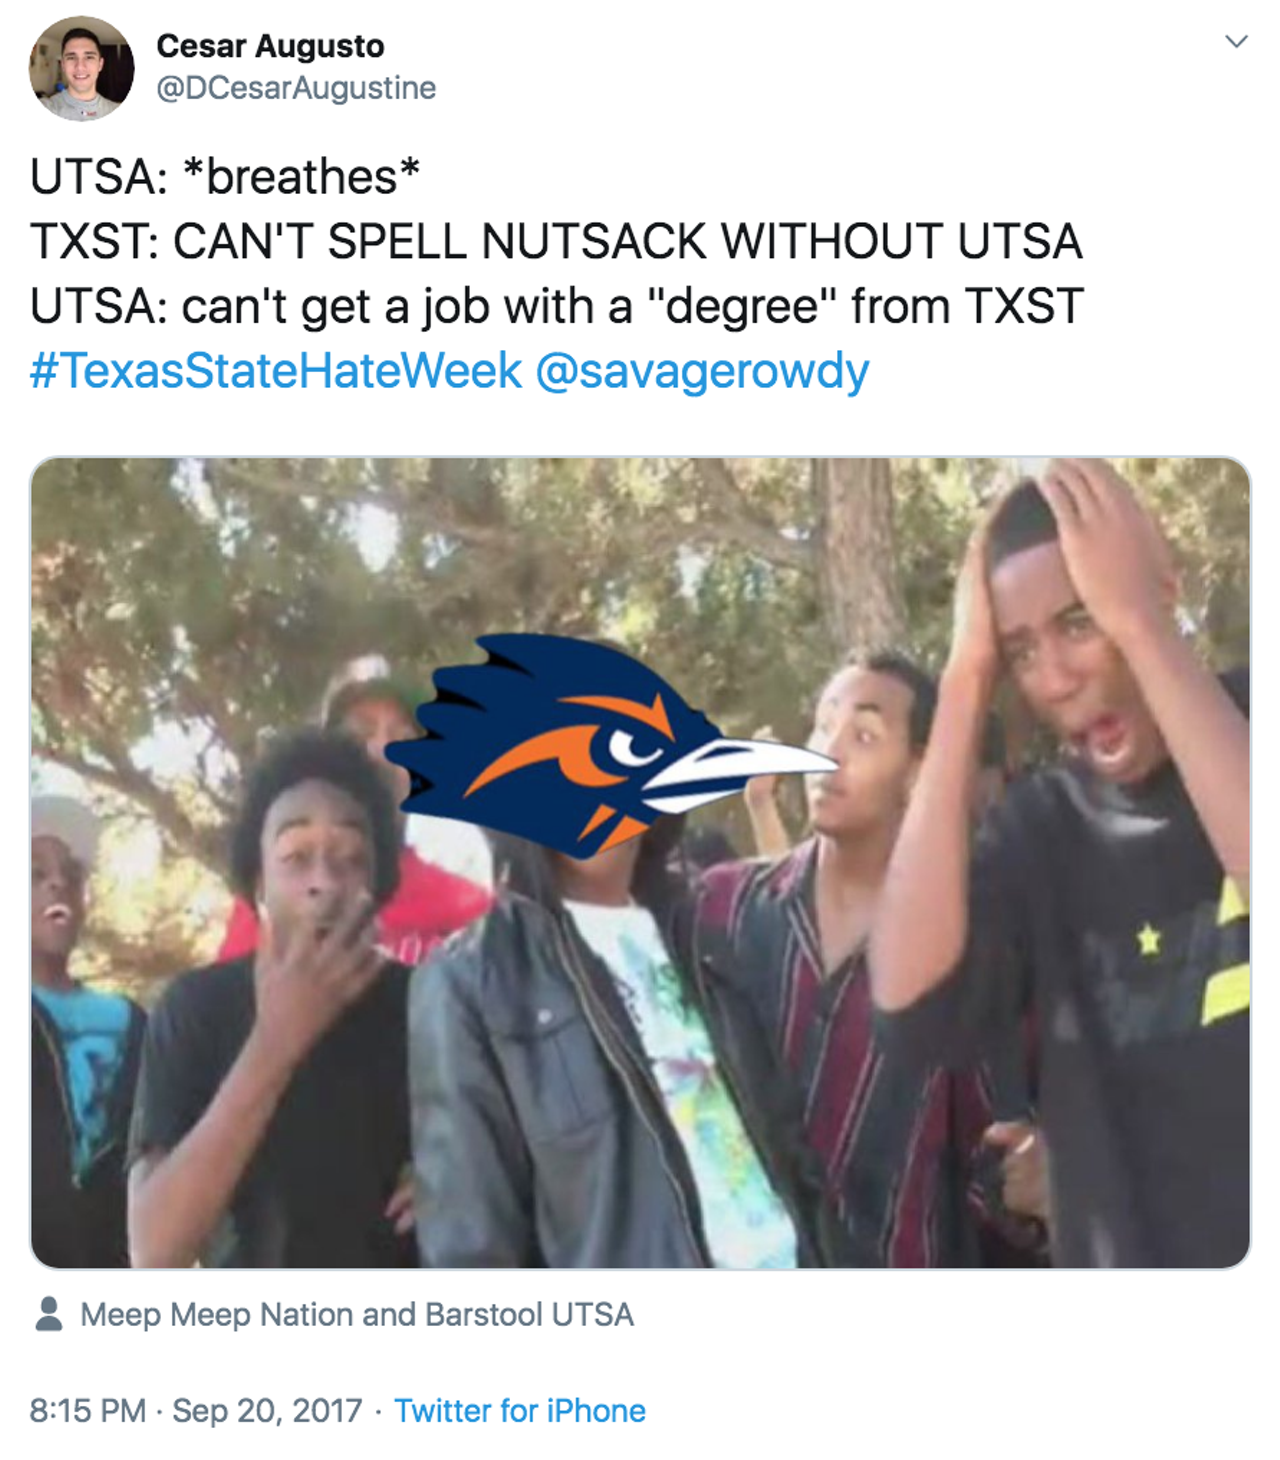 The UTSA/Texas State rivalry is real
I once saw a bar fight between a Roadrunner and a Bobcat. Except they were dudes. And they beat each other up. Nowadays, the rivalry is mostly Twitter meme-based as of late, which is a thousand times more clever and funny — and nobody has to go to jail!
Photo via Twitter / DCesarAugustine